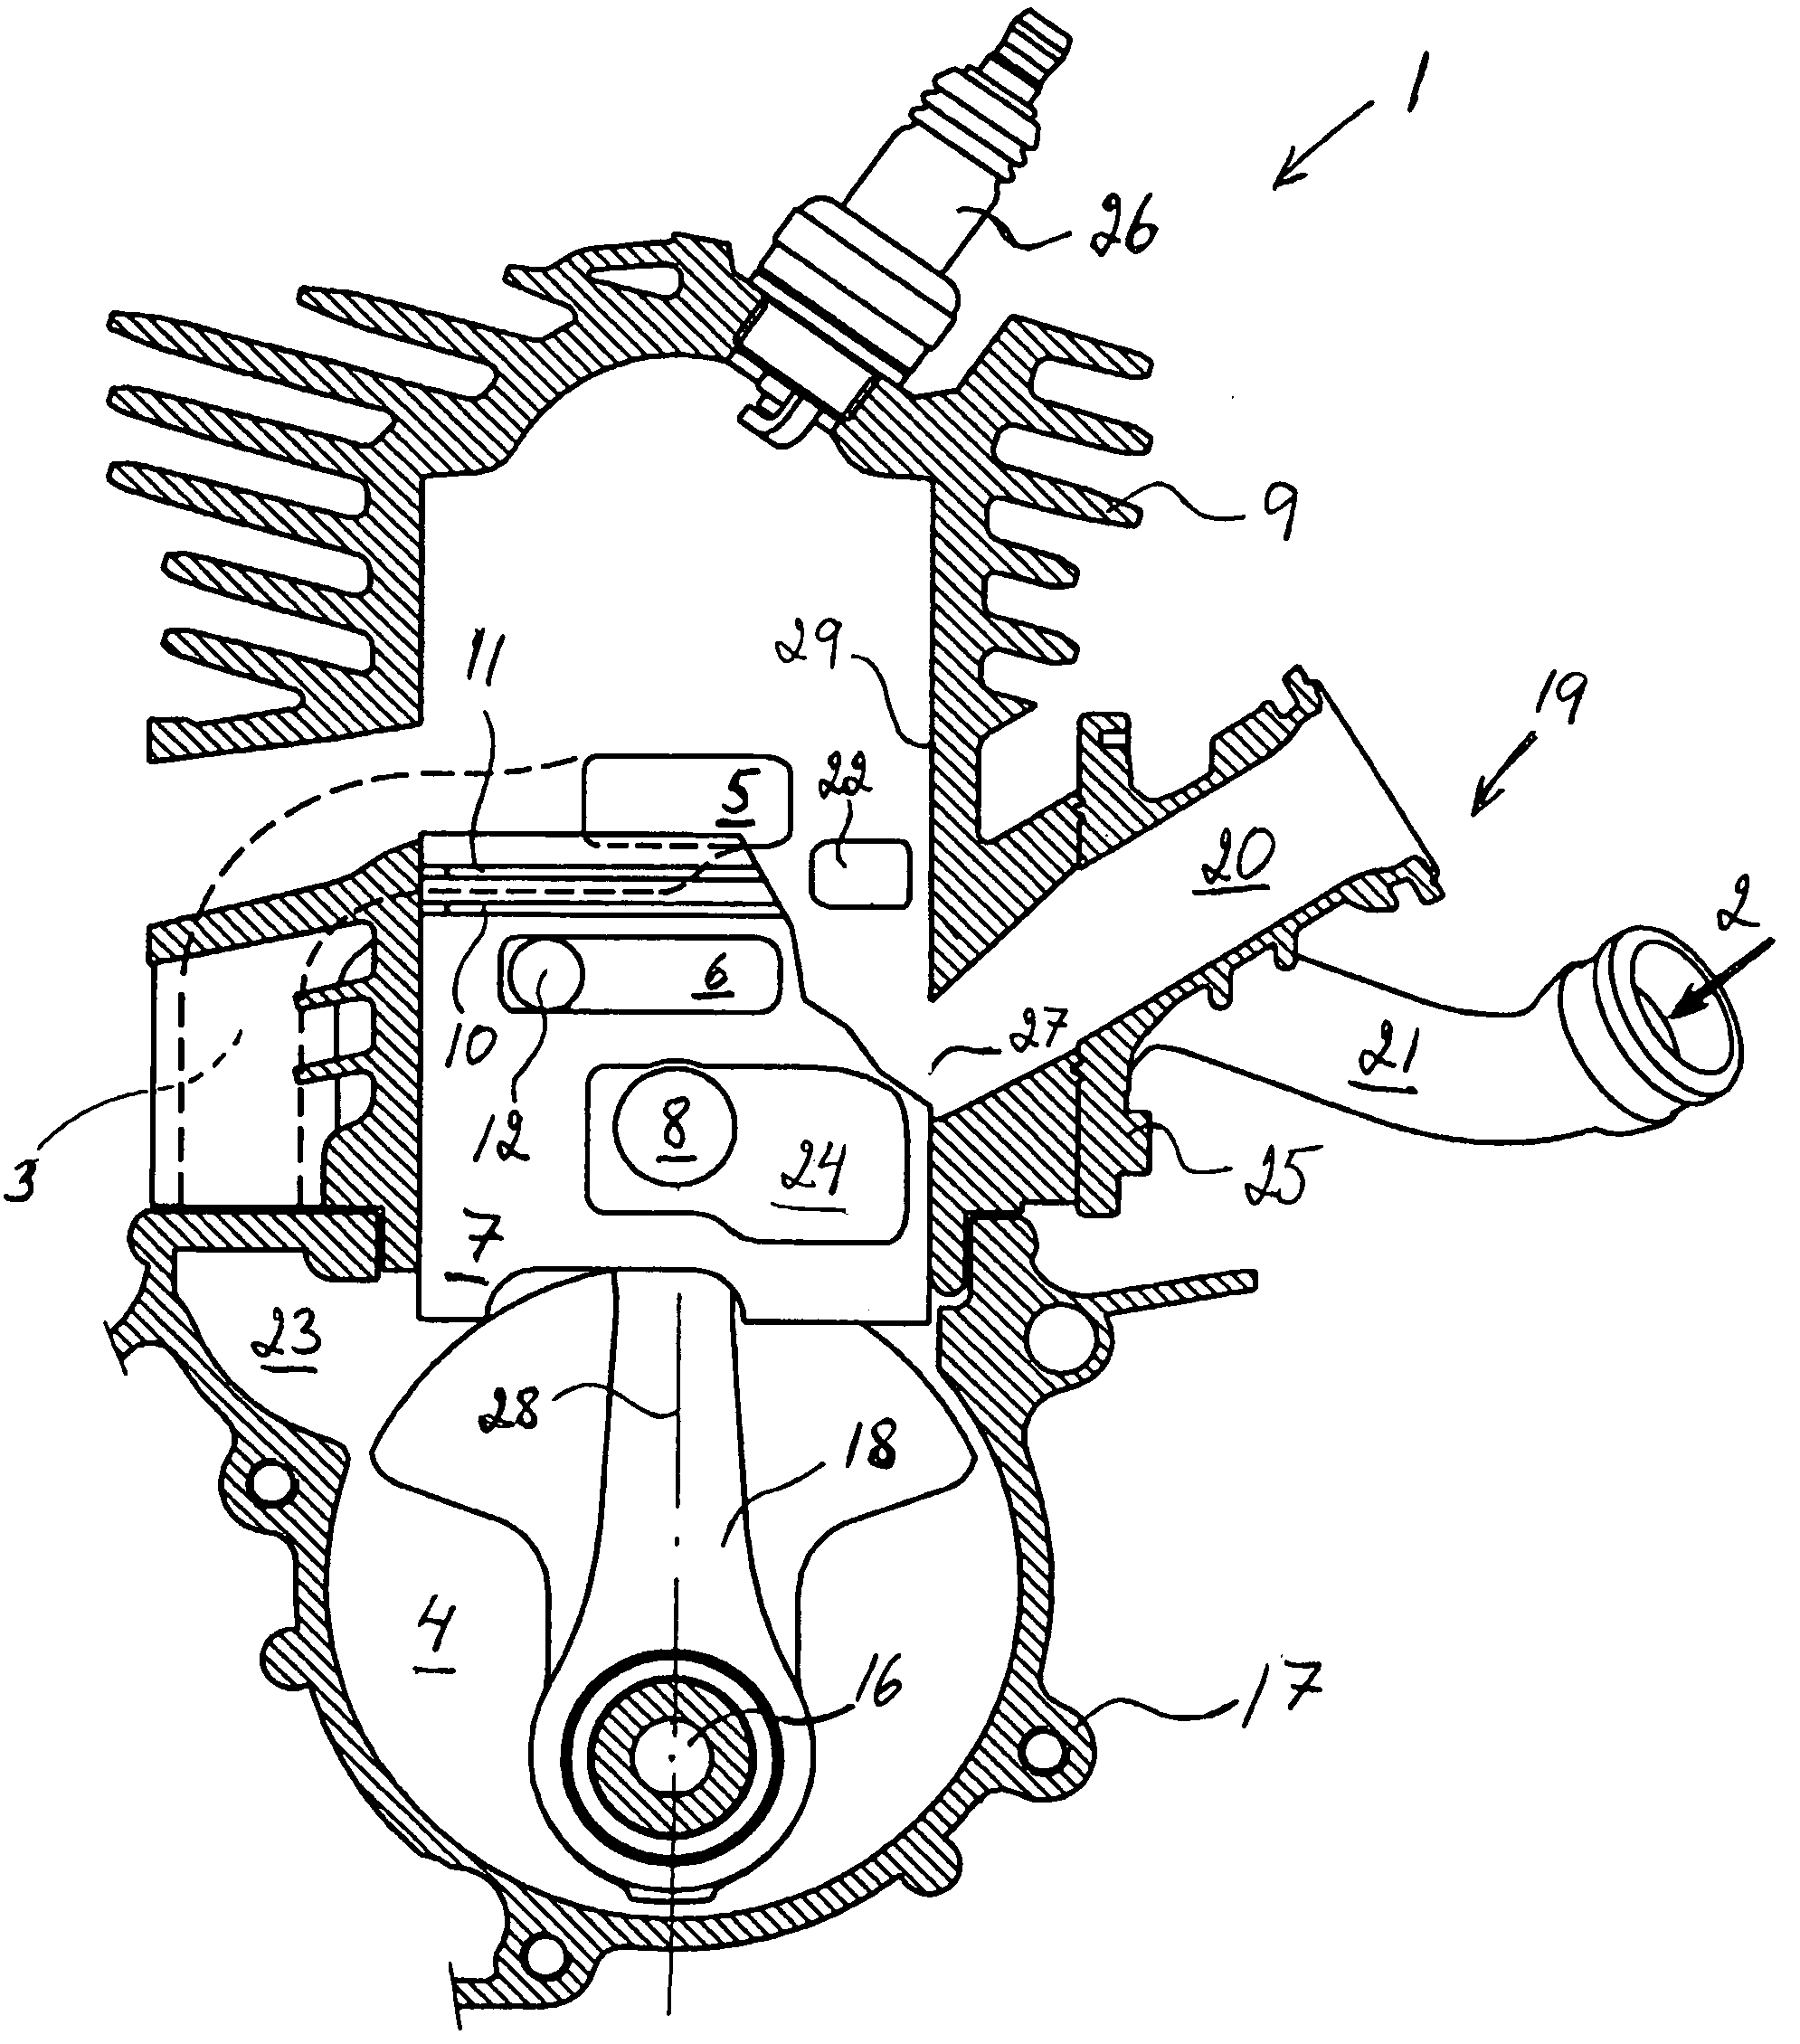 Crankcase scavenged two-stroke internal combustion engine having an additional air supply